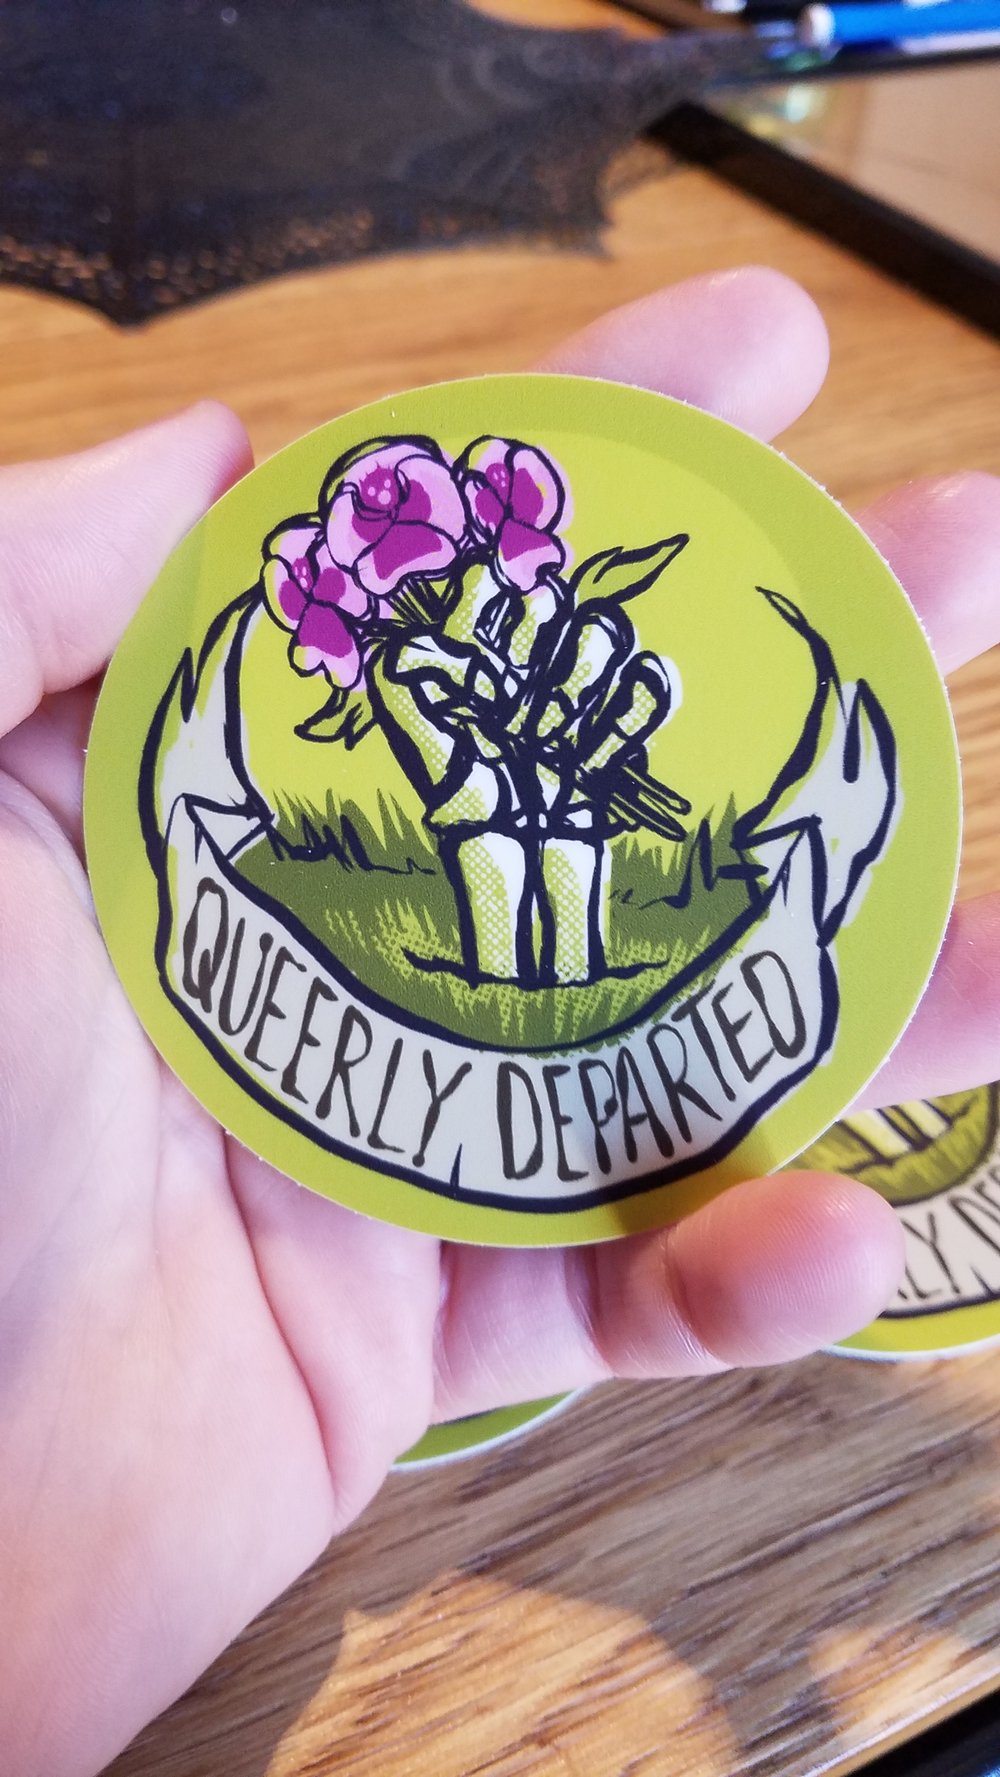 Queerly Departed Sticker